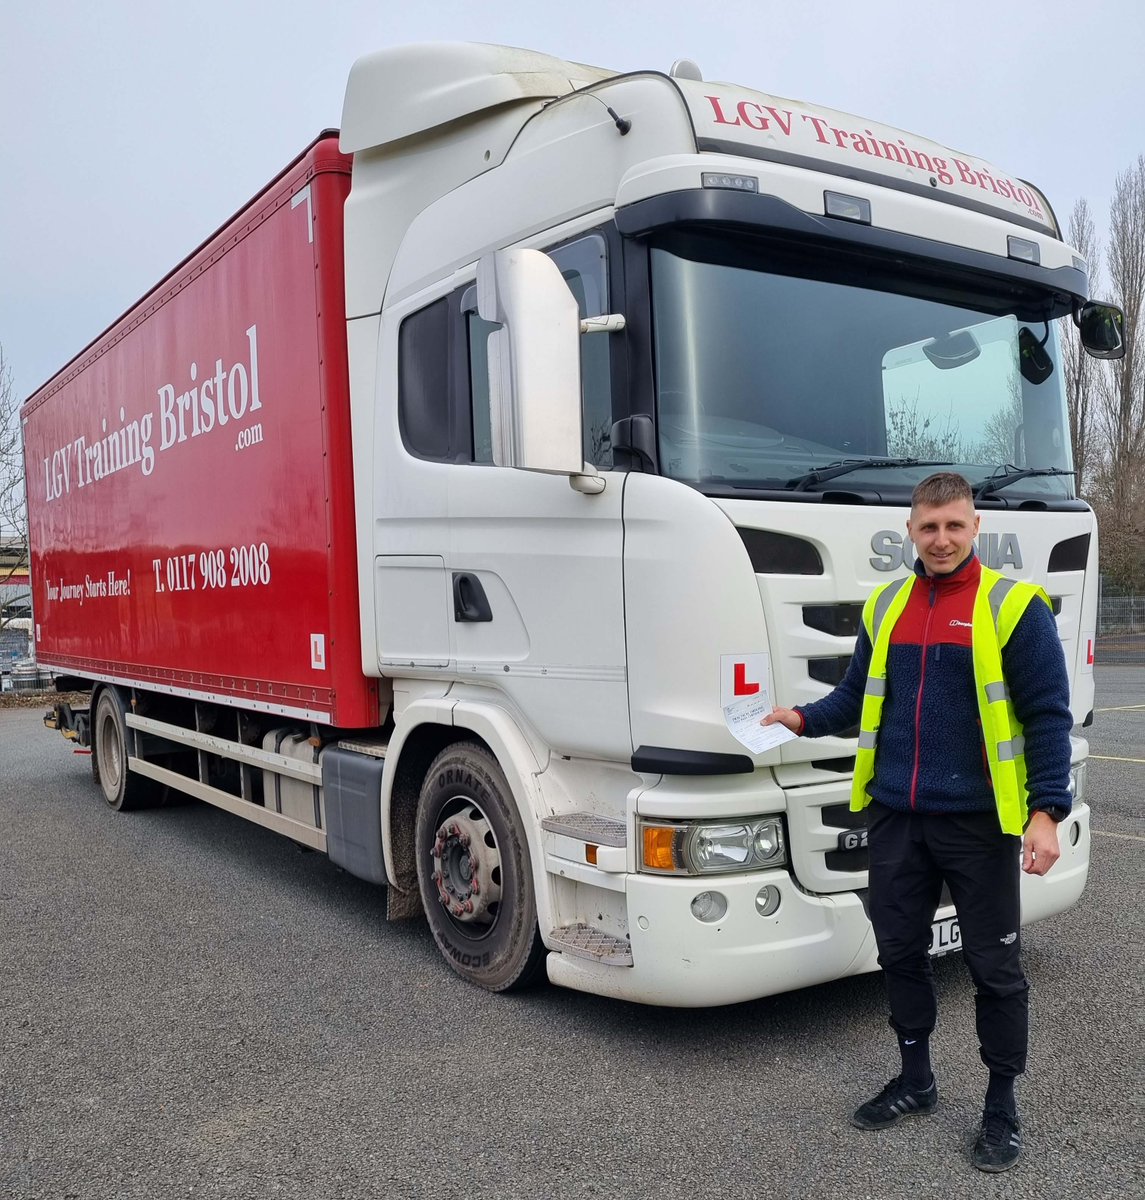 Another Fantastic Friday! Two more first time passes. Huge congratulations to Greg on passing his LGV Cat.C driving test today. We wish you all the very best for the future Greg. LGVTrainingBristol.com #YourJourneyStartsHere